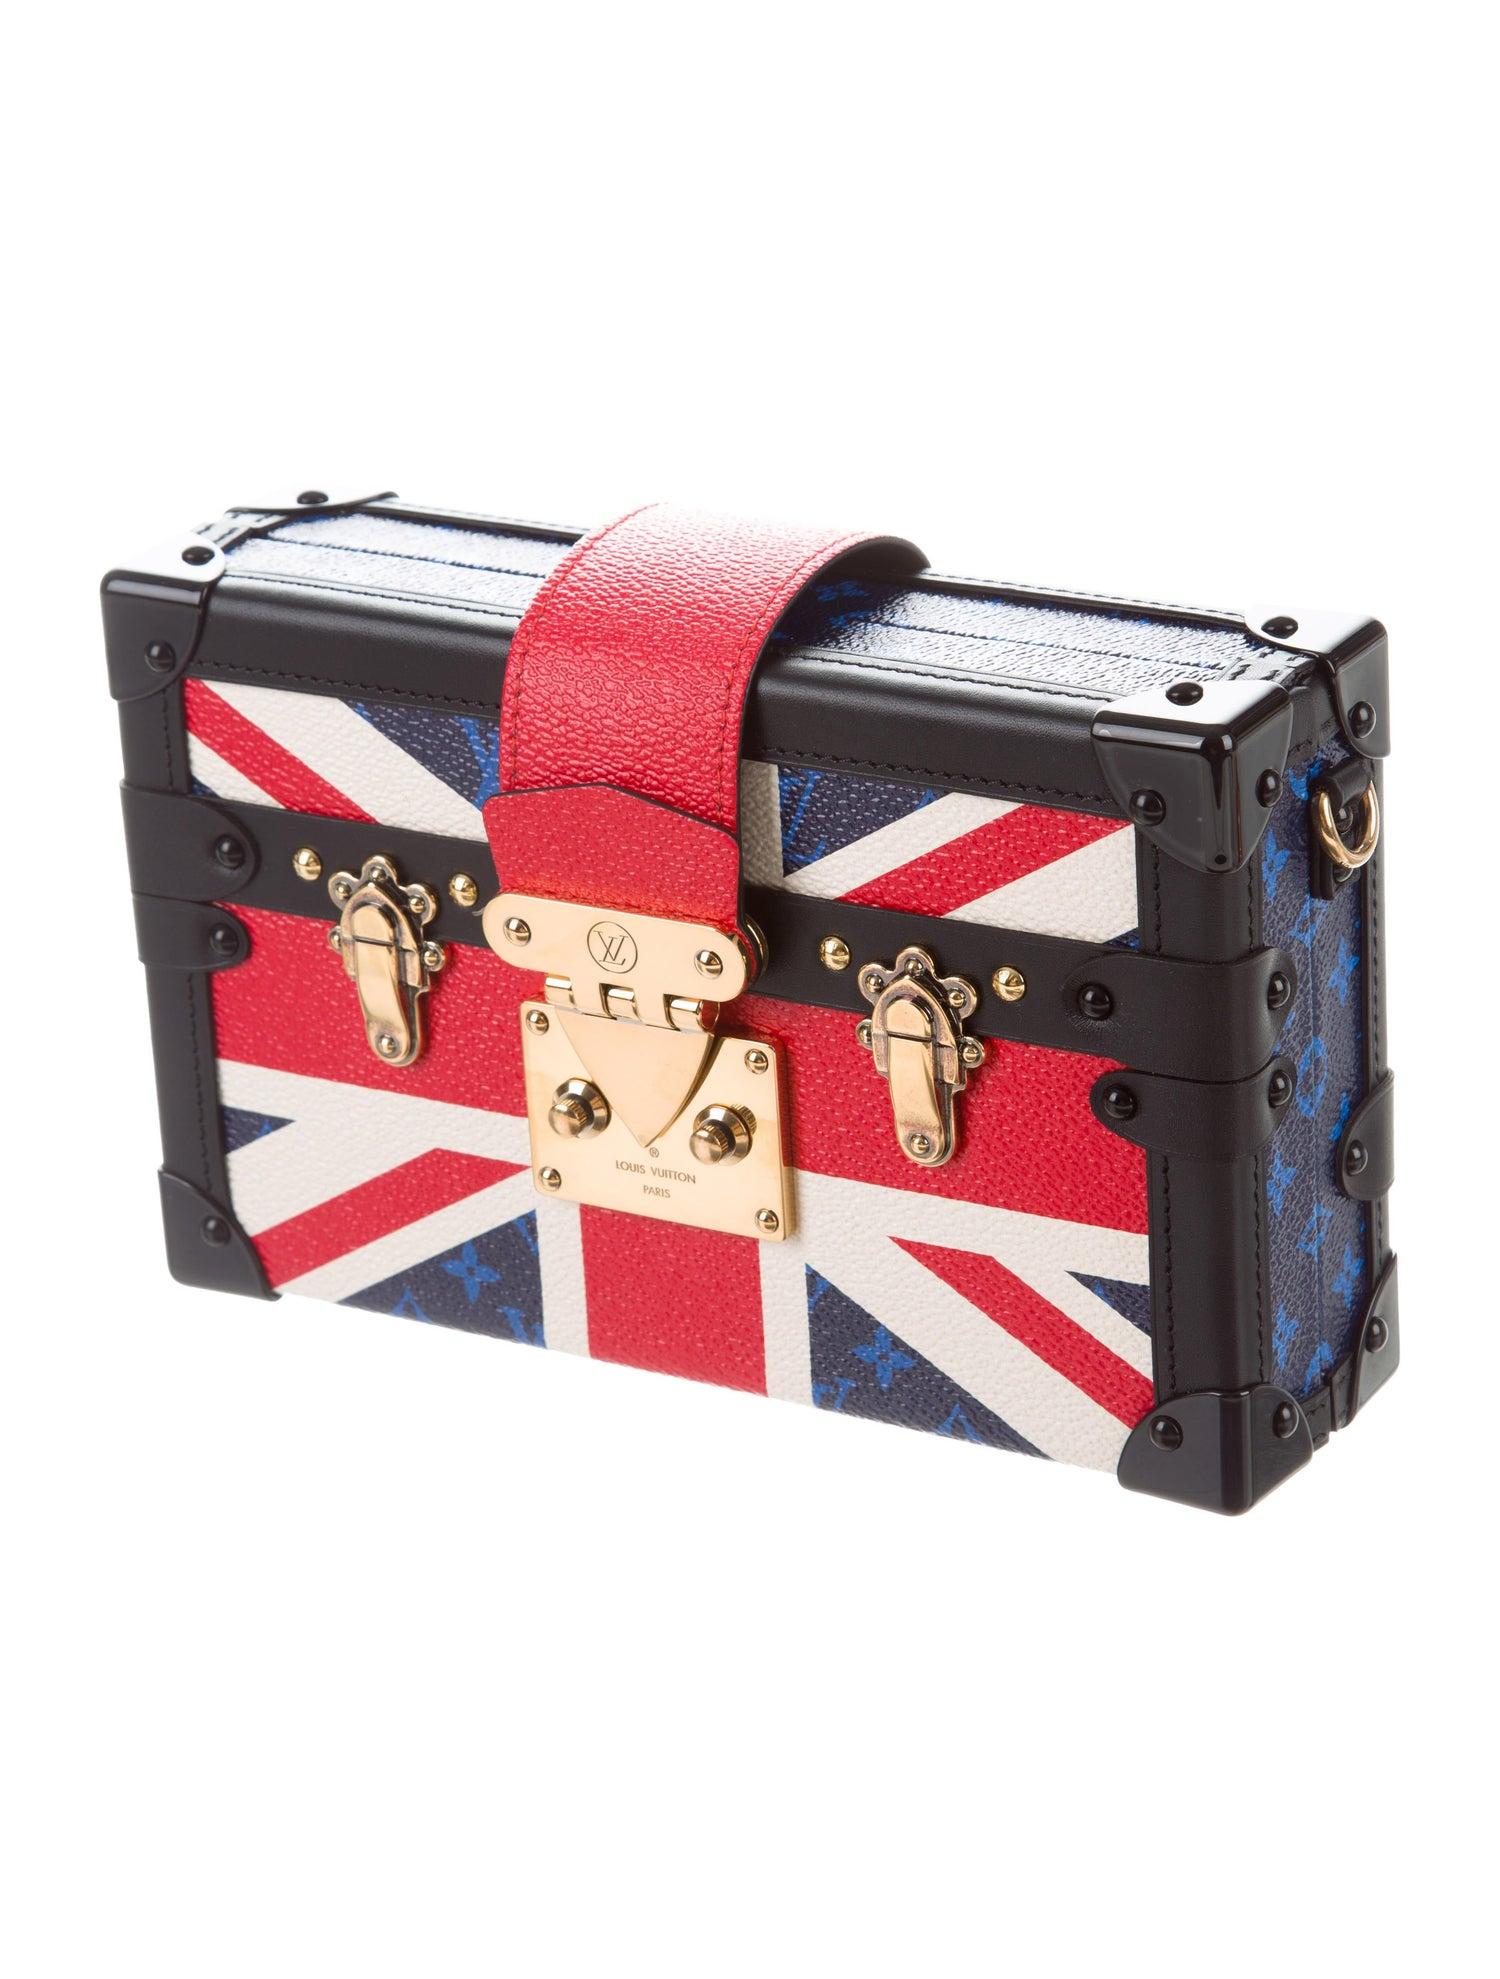 Extremely rare and limited edition, this Louis Vuitton clutch was created to commemorate the wedding of Prince Harry and Meghan Markle. Featuring the signature British Union Jack and brass-tone hardware, it is a one-of-a-kind historical piece that